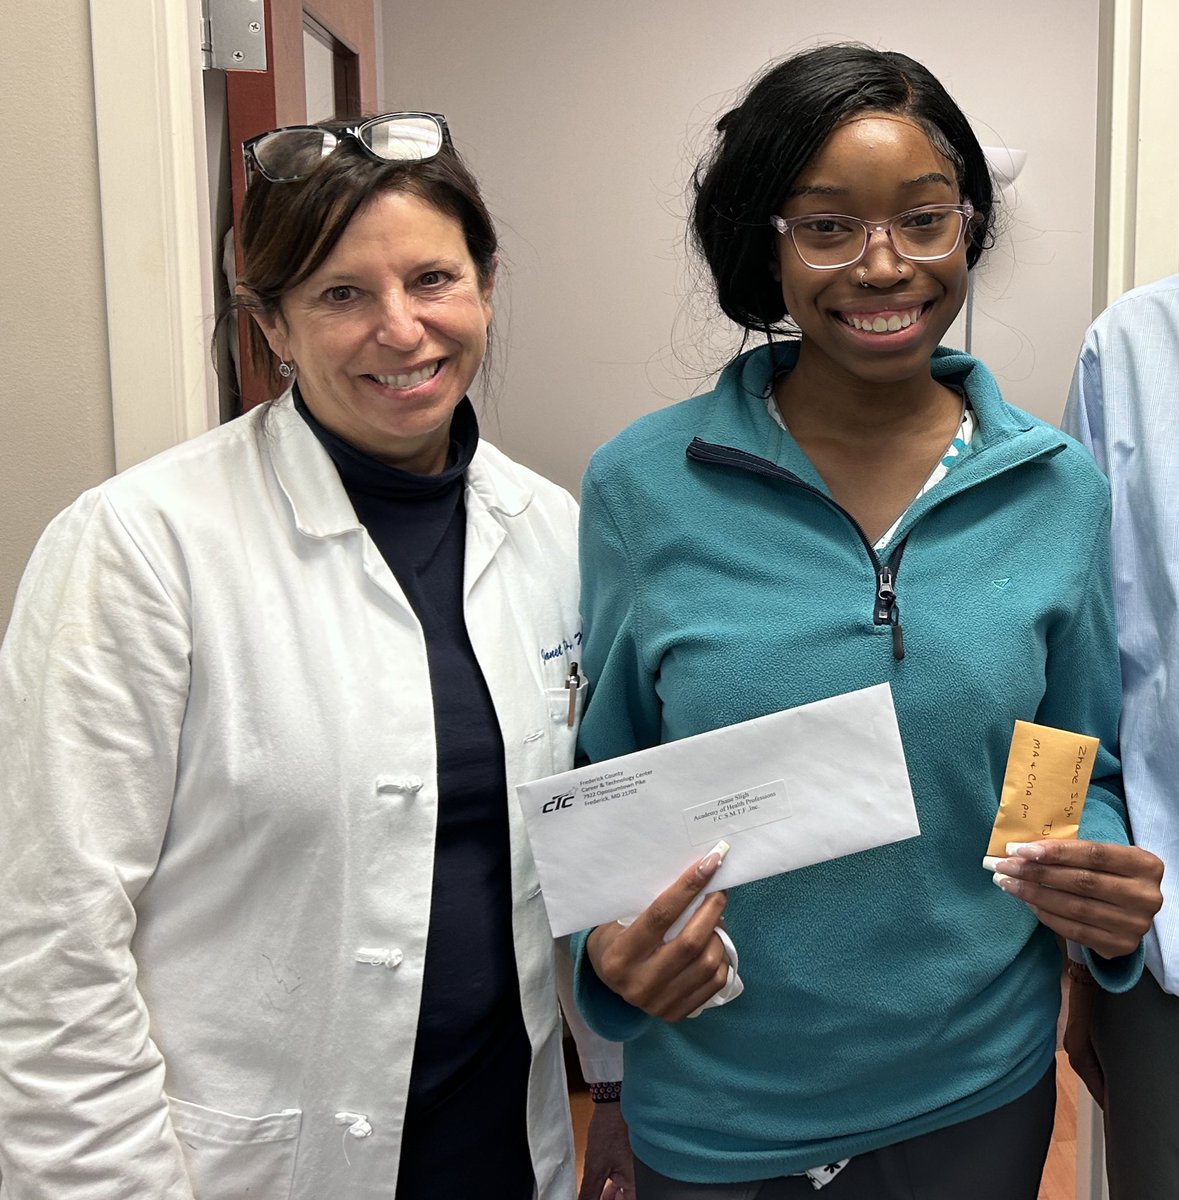 Congrats to Zhane S. for receiving a $1000 scholarship from CTC’s Trade Foundation. She also obtained both her Certified Nursing & Medical Assistant pins! She doing a great job at the Women’s Health Specialist job site. Thank you Dr. Parnes! @FrederickCTC @AohpCtc @FCPSMaryland